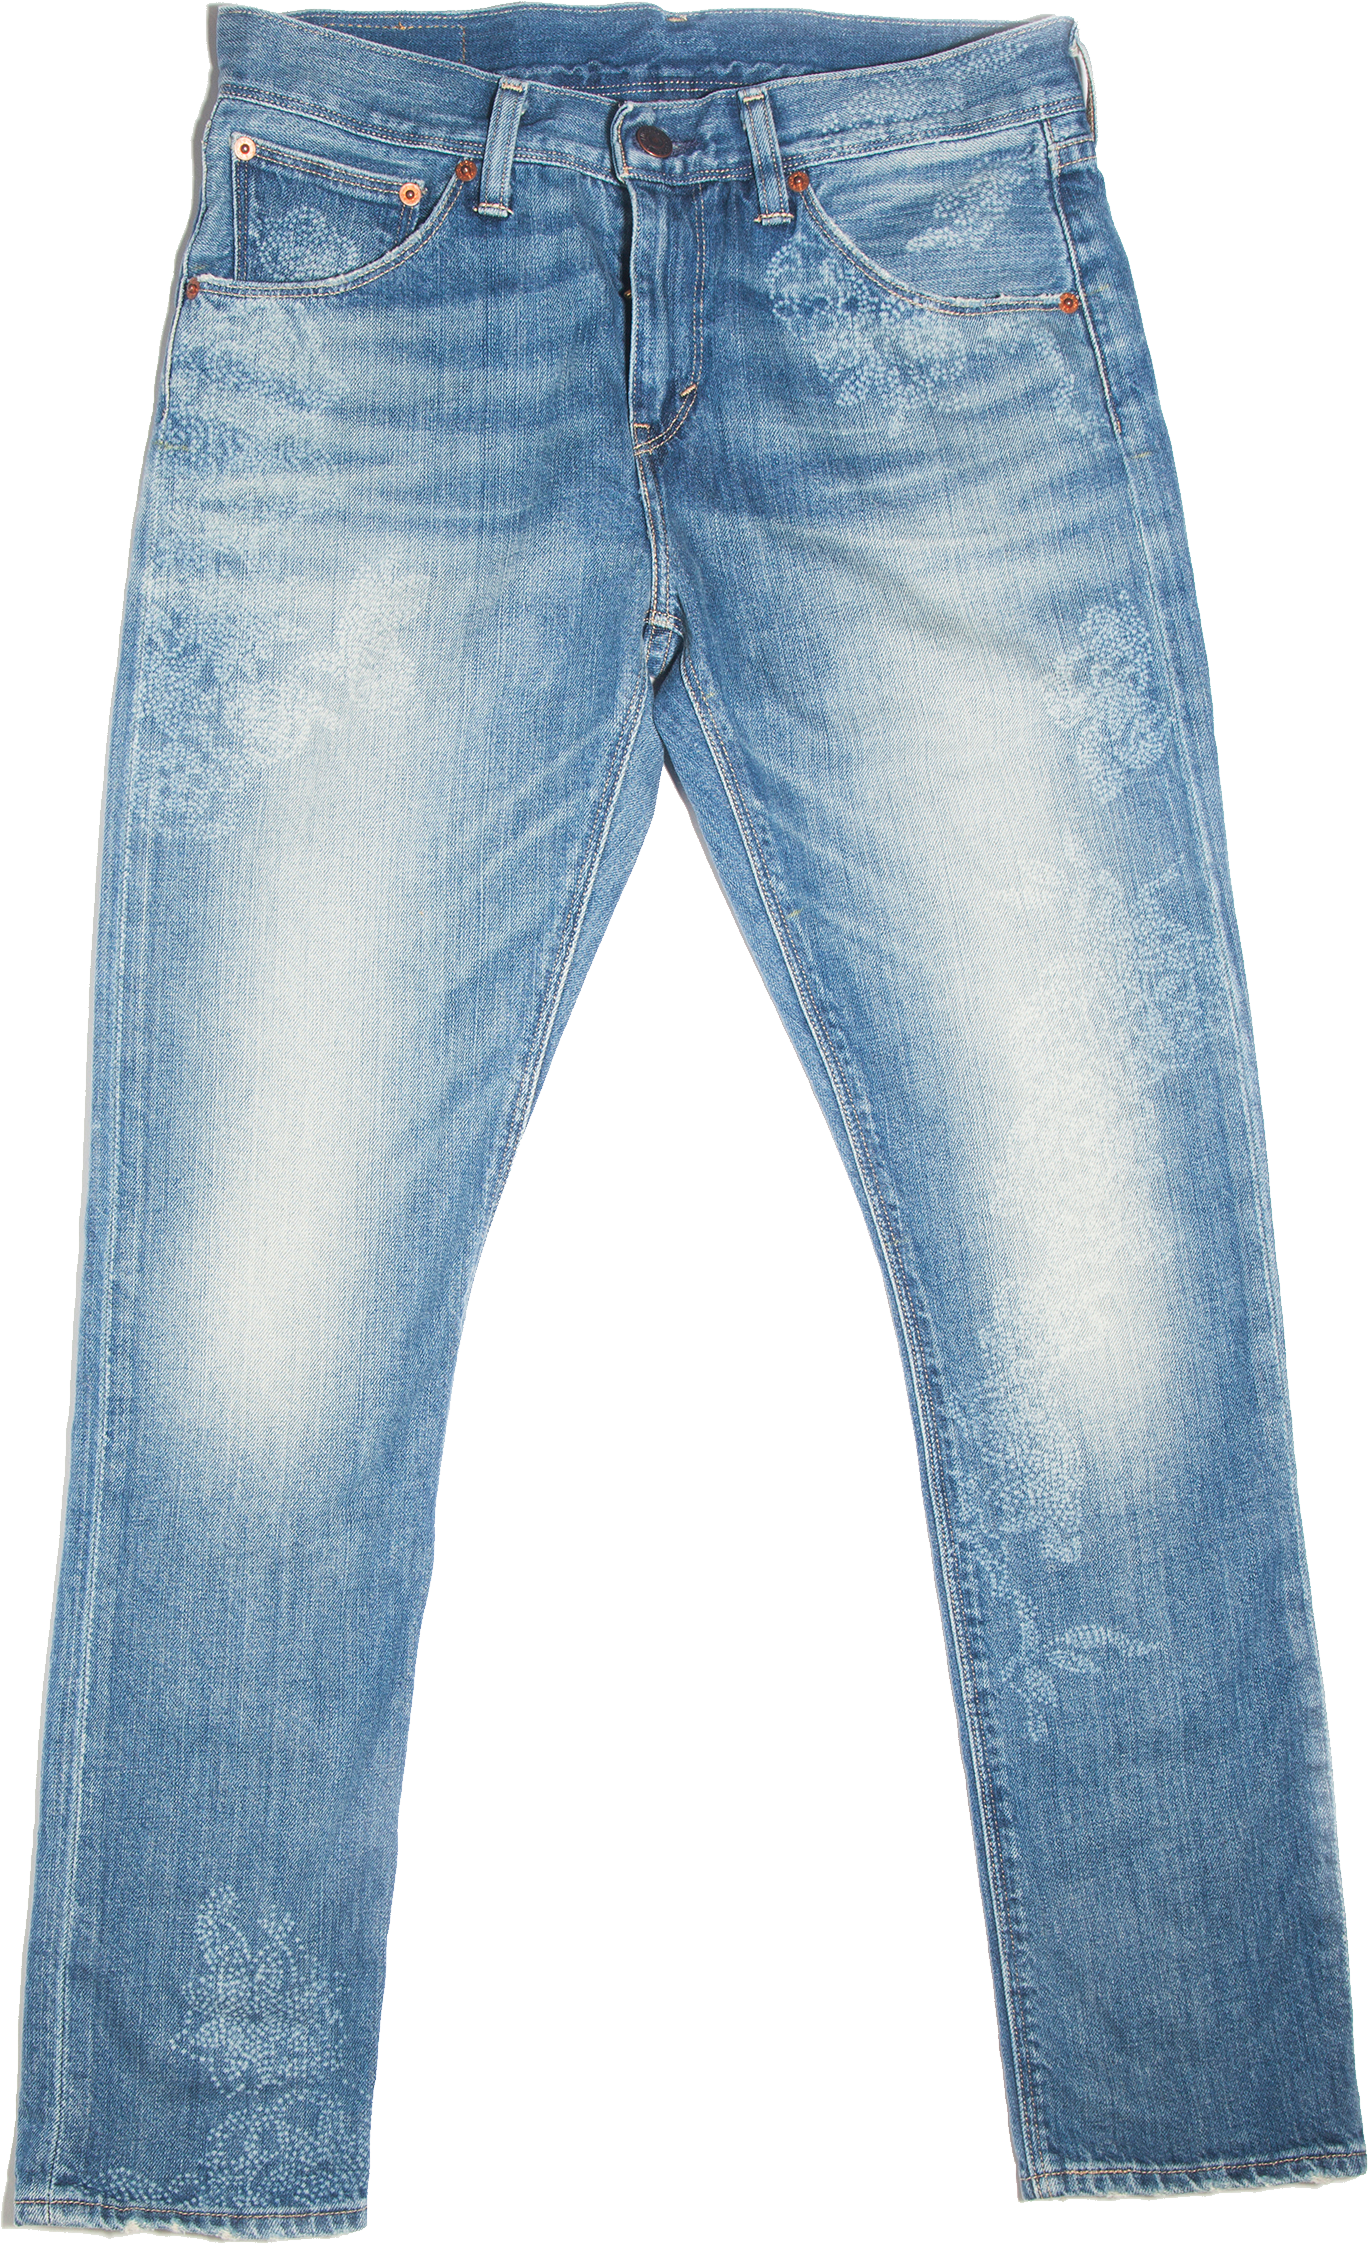 Jeans Png Image - Jeans, Transparent background PNG HD thumbnail